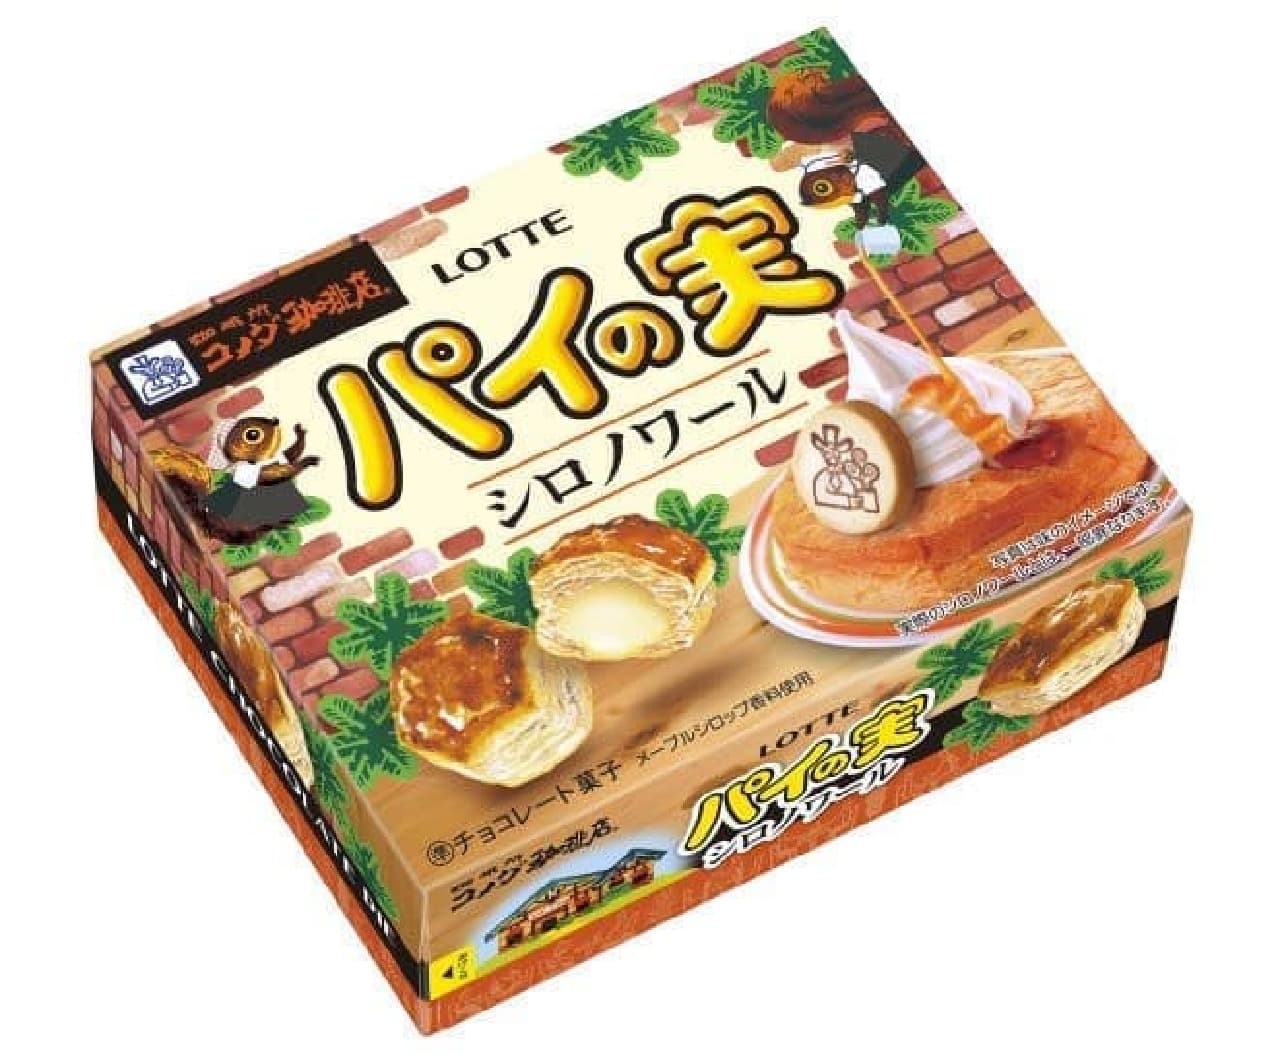 "Pai no Mi [Shiro Noir supervised by Komeda Coffee Shop]" is a pie fruit that reproduces the taste of "Shiro Noir", which is the signature menu of Komeda Coffee Shop.